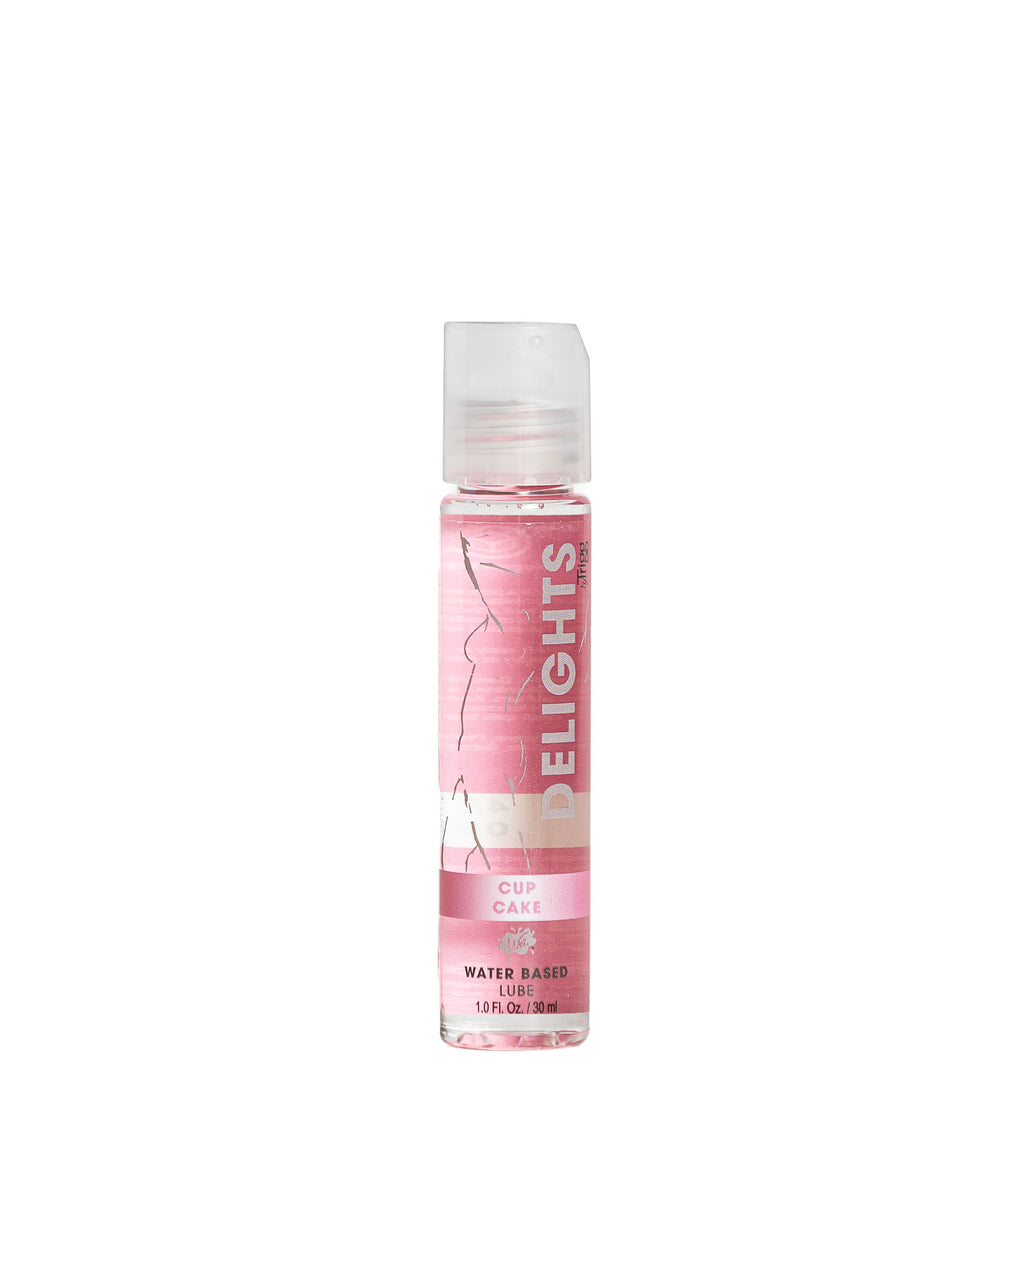 Delight Water Based - Cupcake - Flavored Lube 1 Oz WT21540